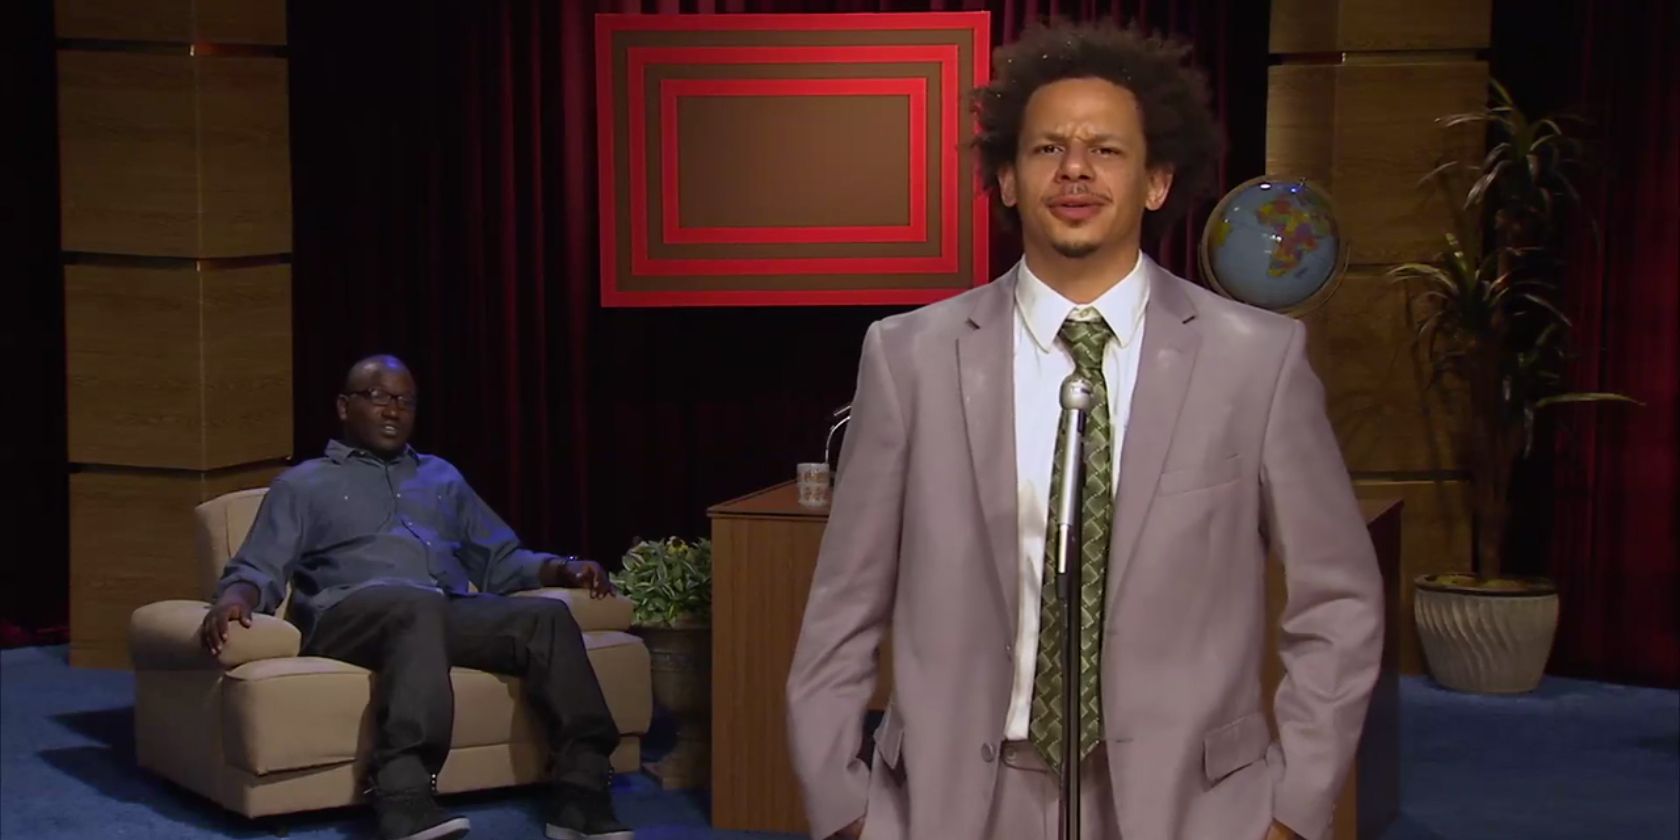 Eric Andre and Hannibal Buress